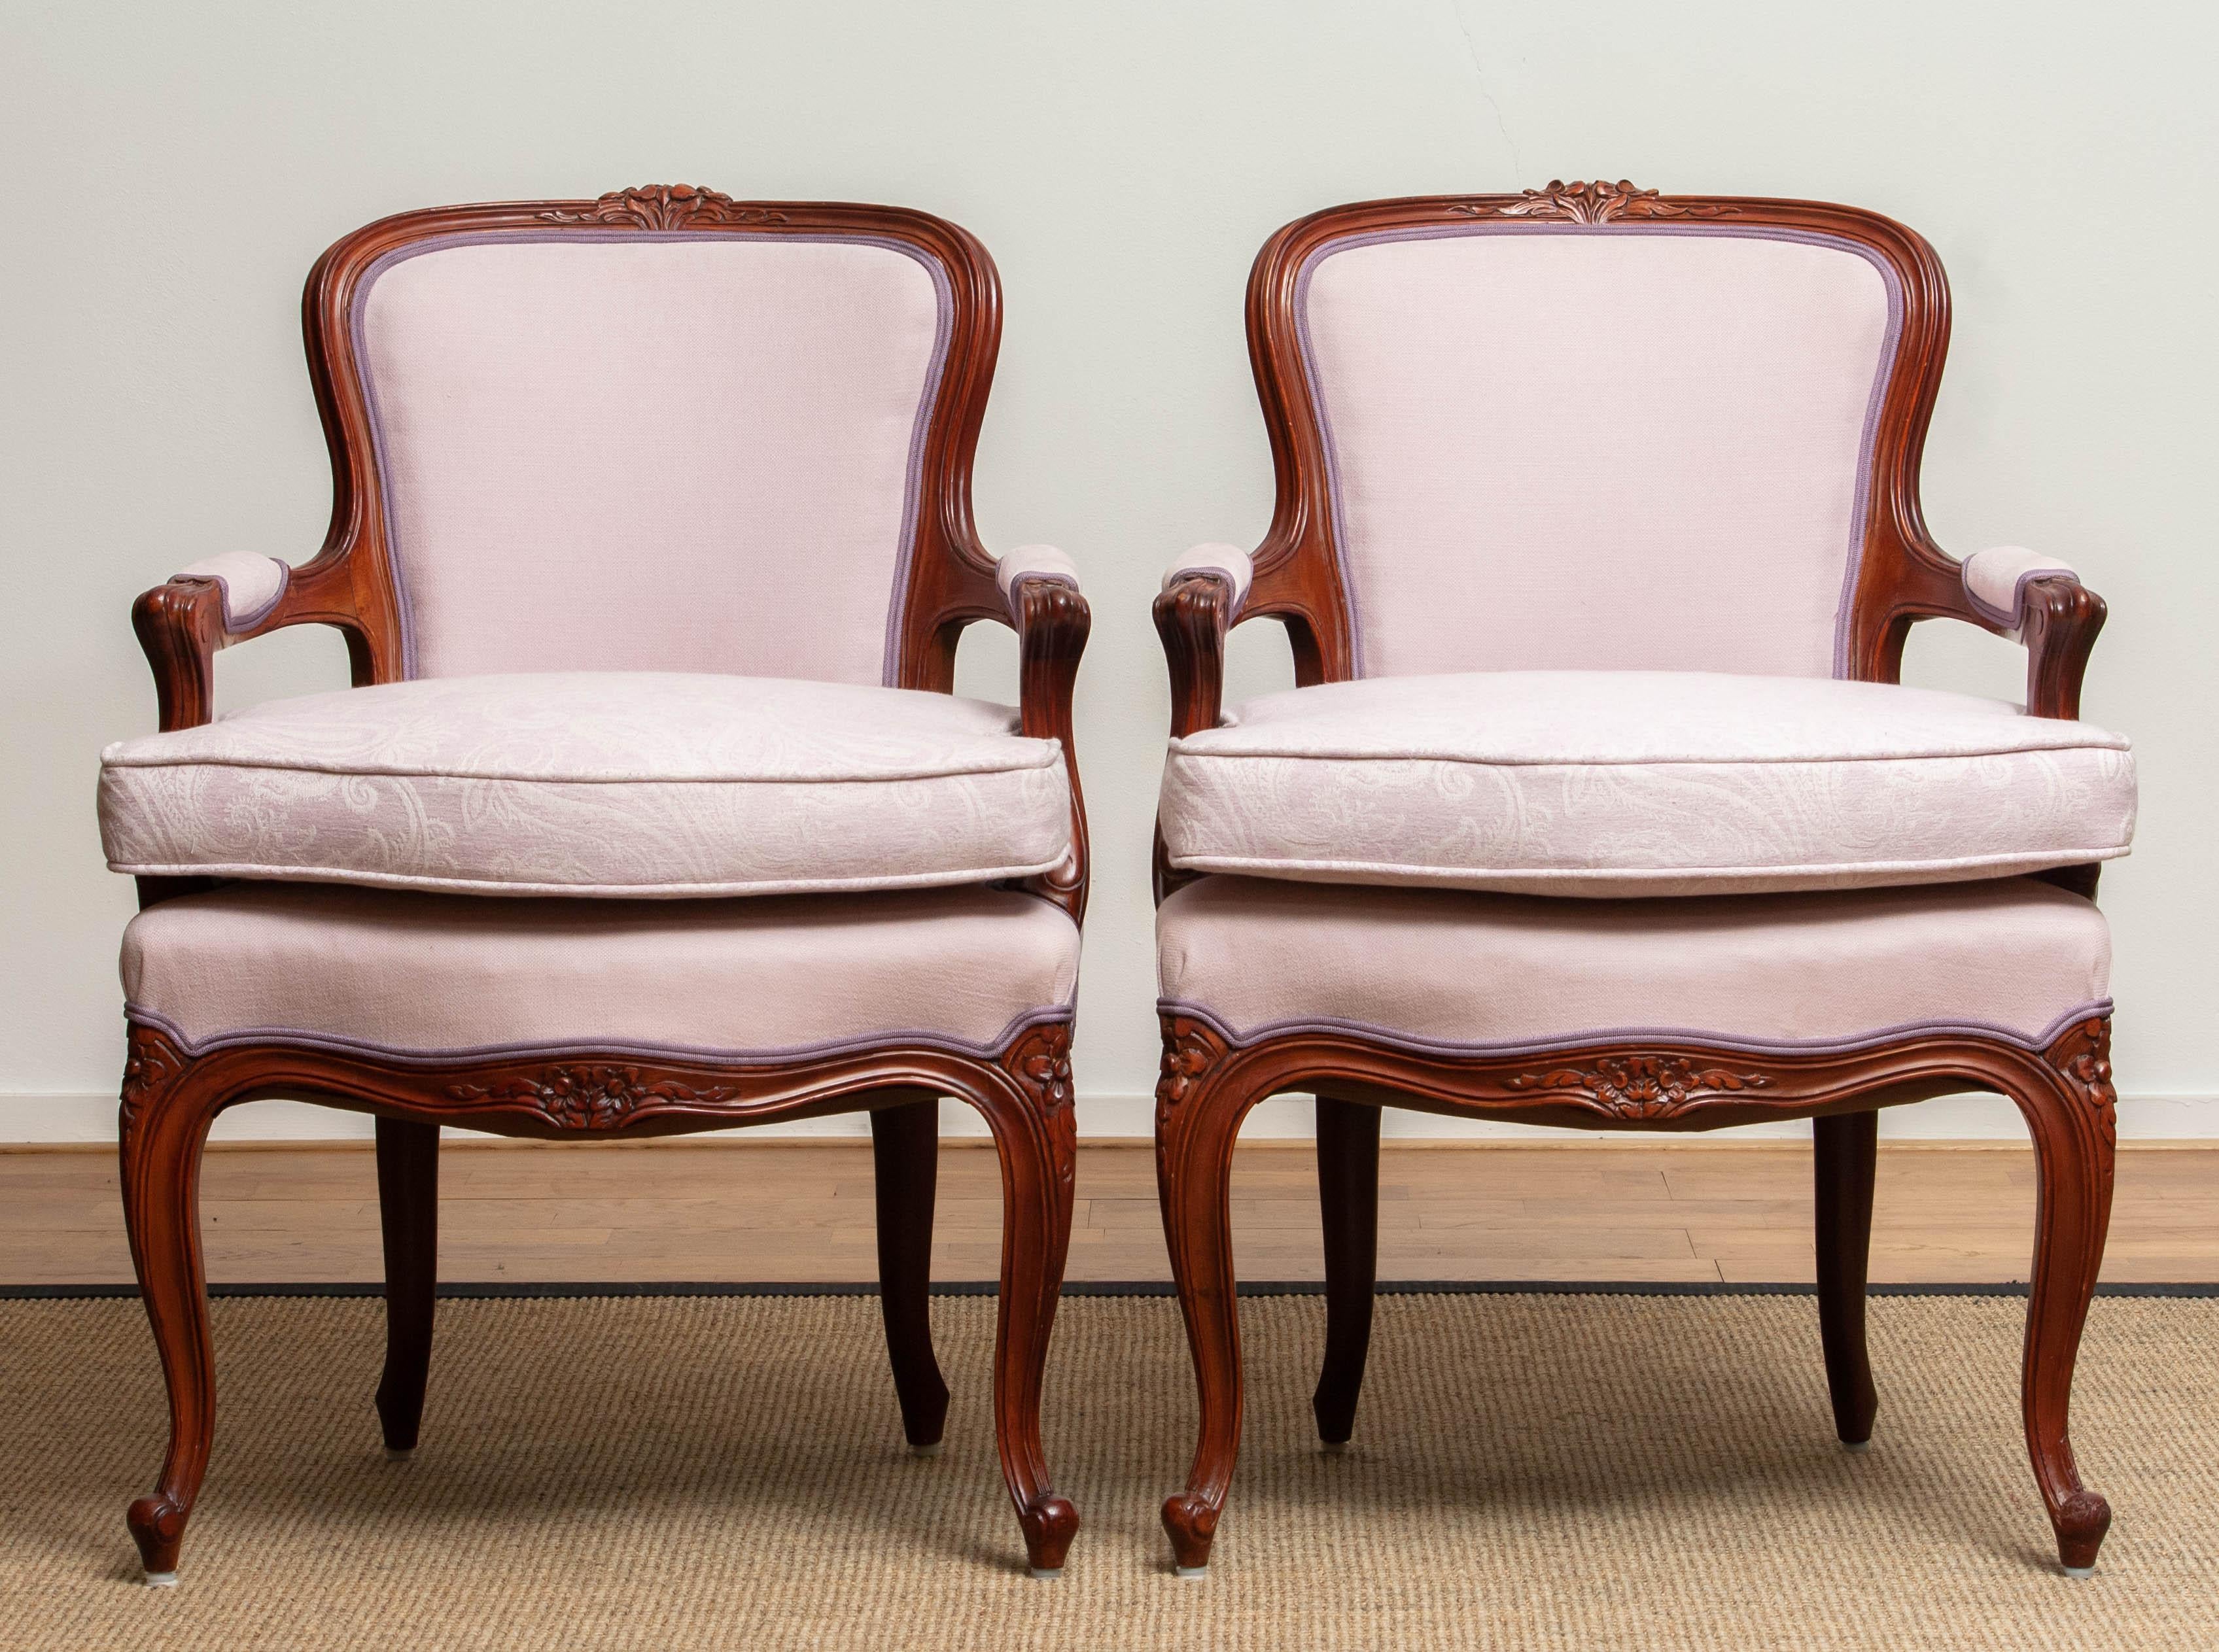 1950s Pair of Pink Swedish Rococo Bergères in the Shabby Chic Technique Chairs F In Good Condition In Silvolde, Gelderland